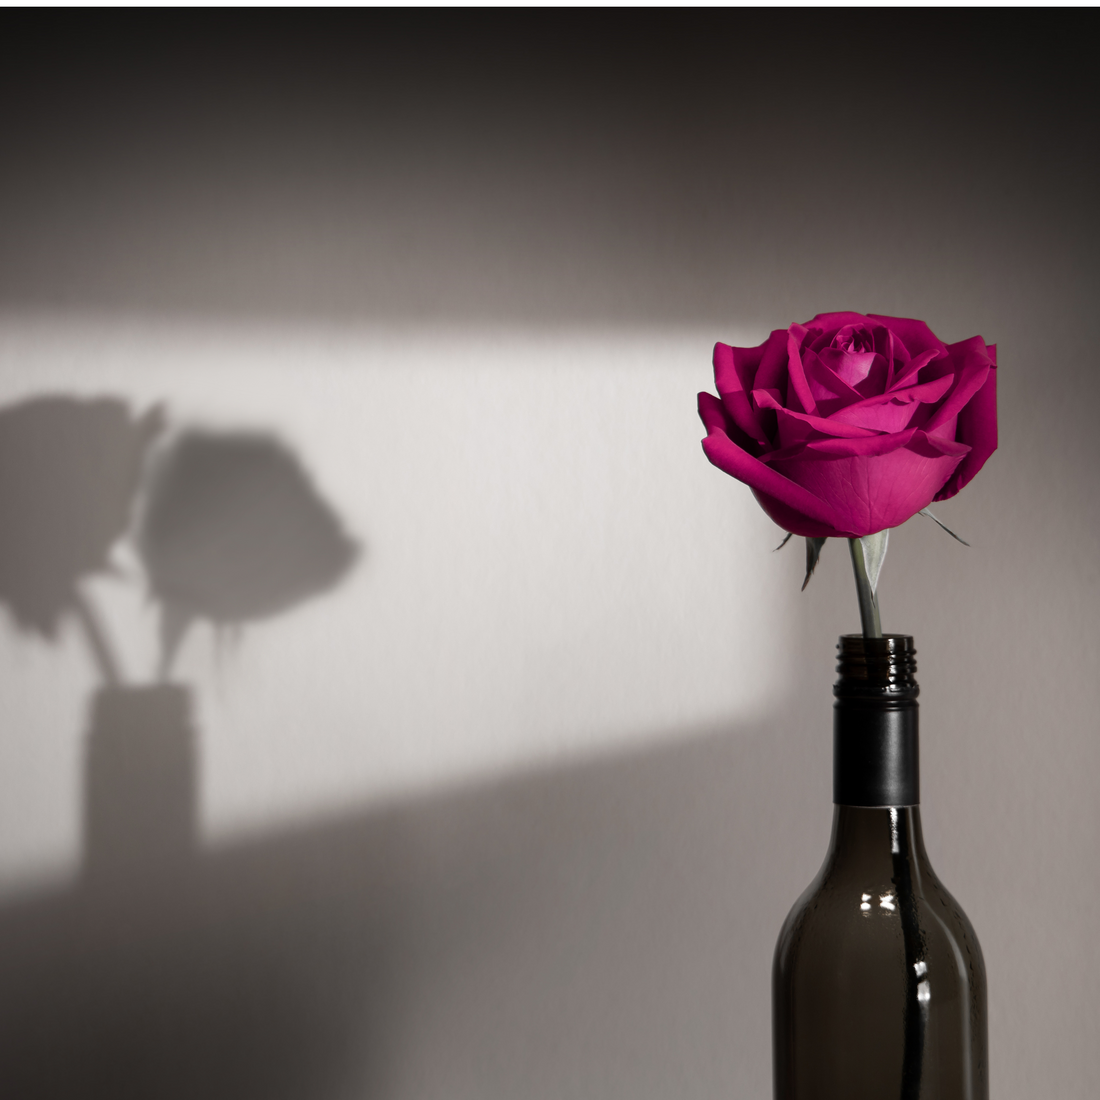 Upcycle wine bottles by crafting into flower vases.